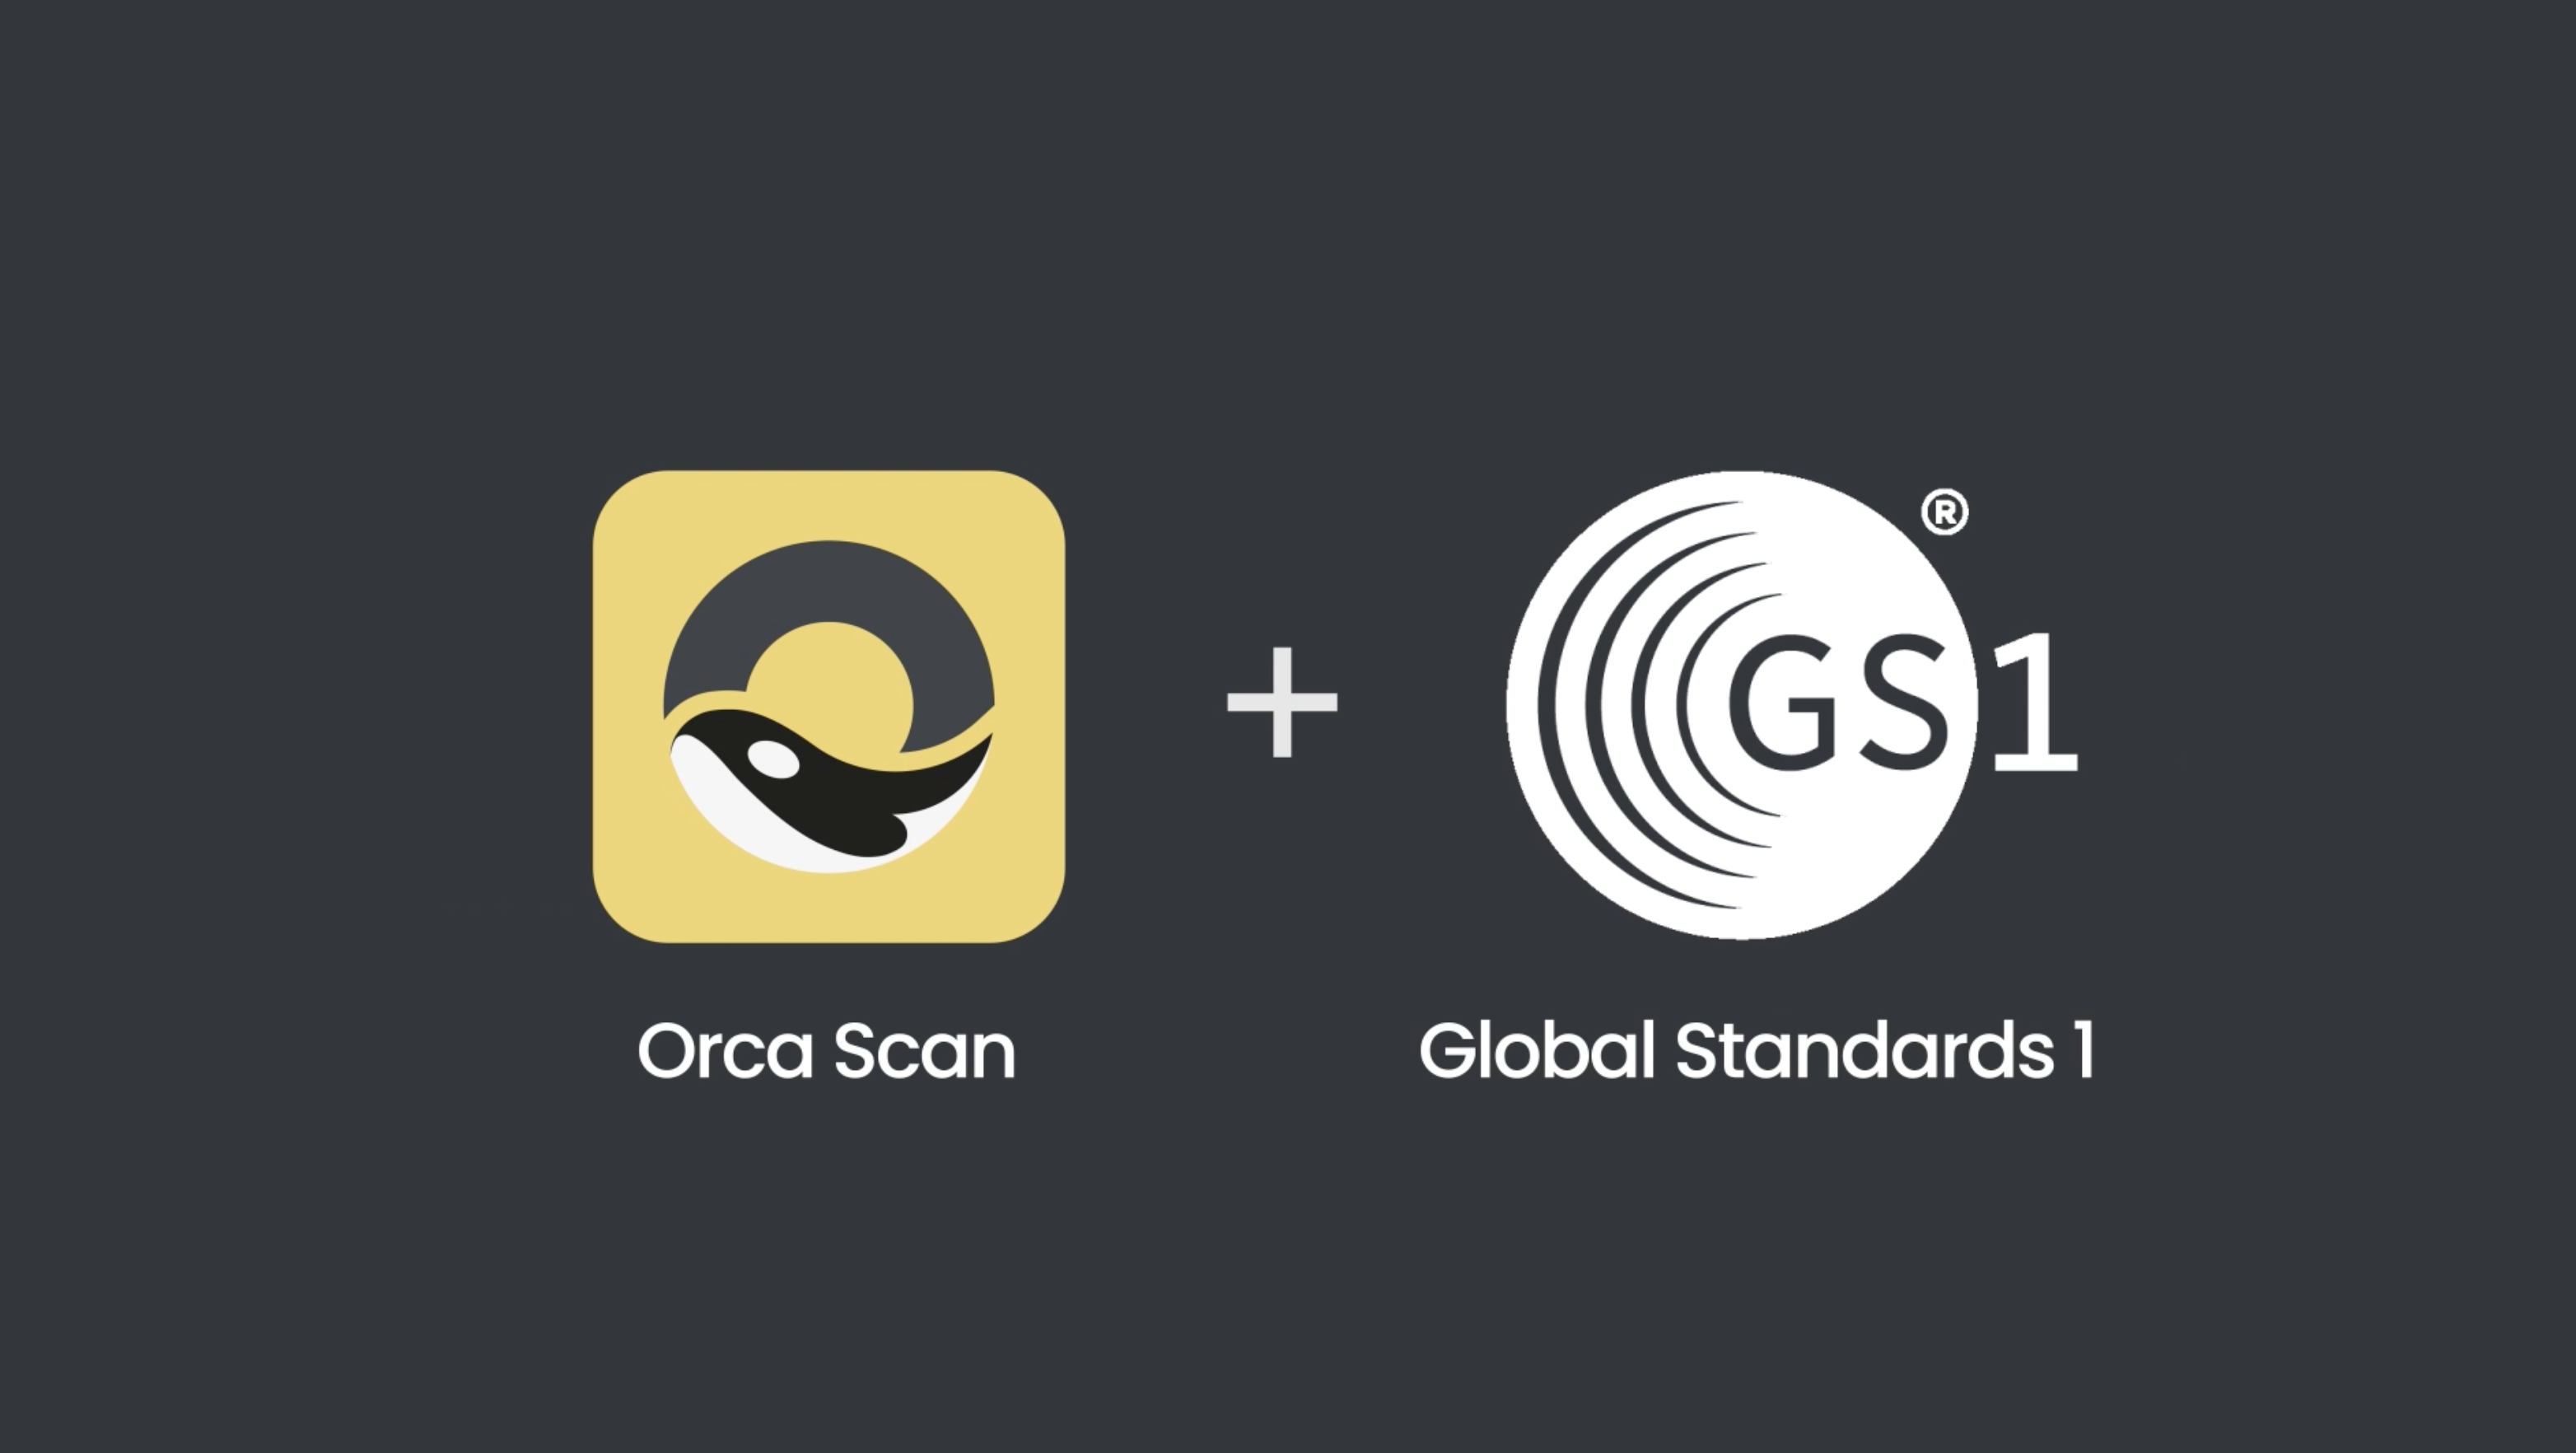 Orca Scan is now GS1 approved